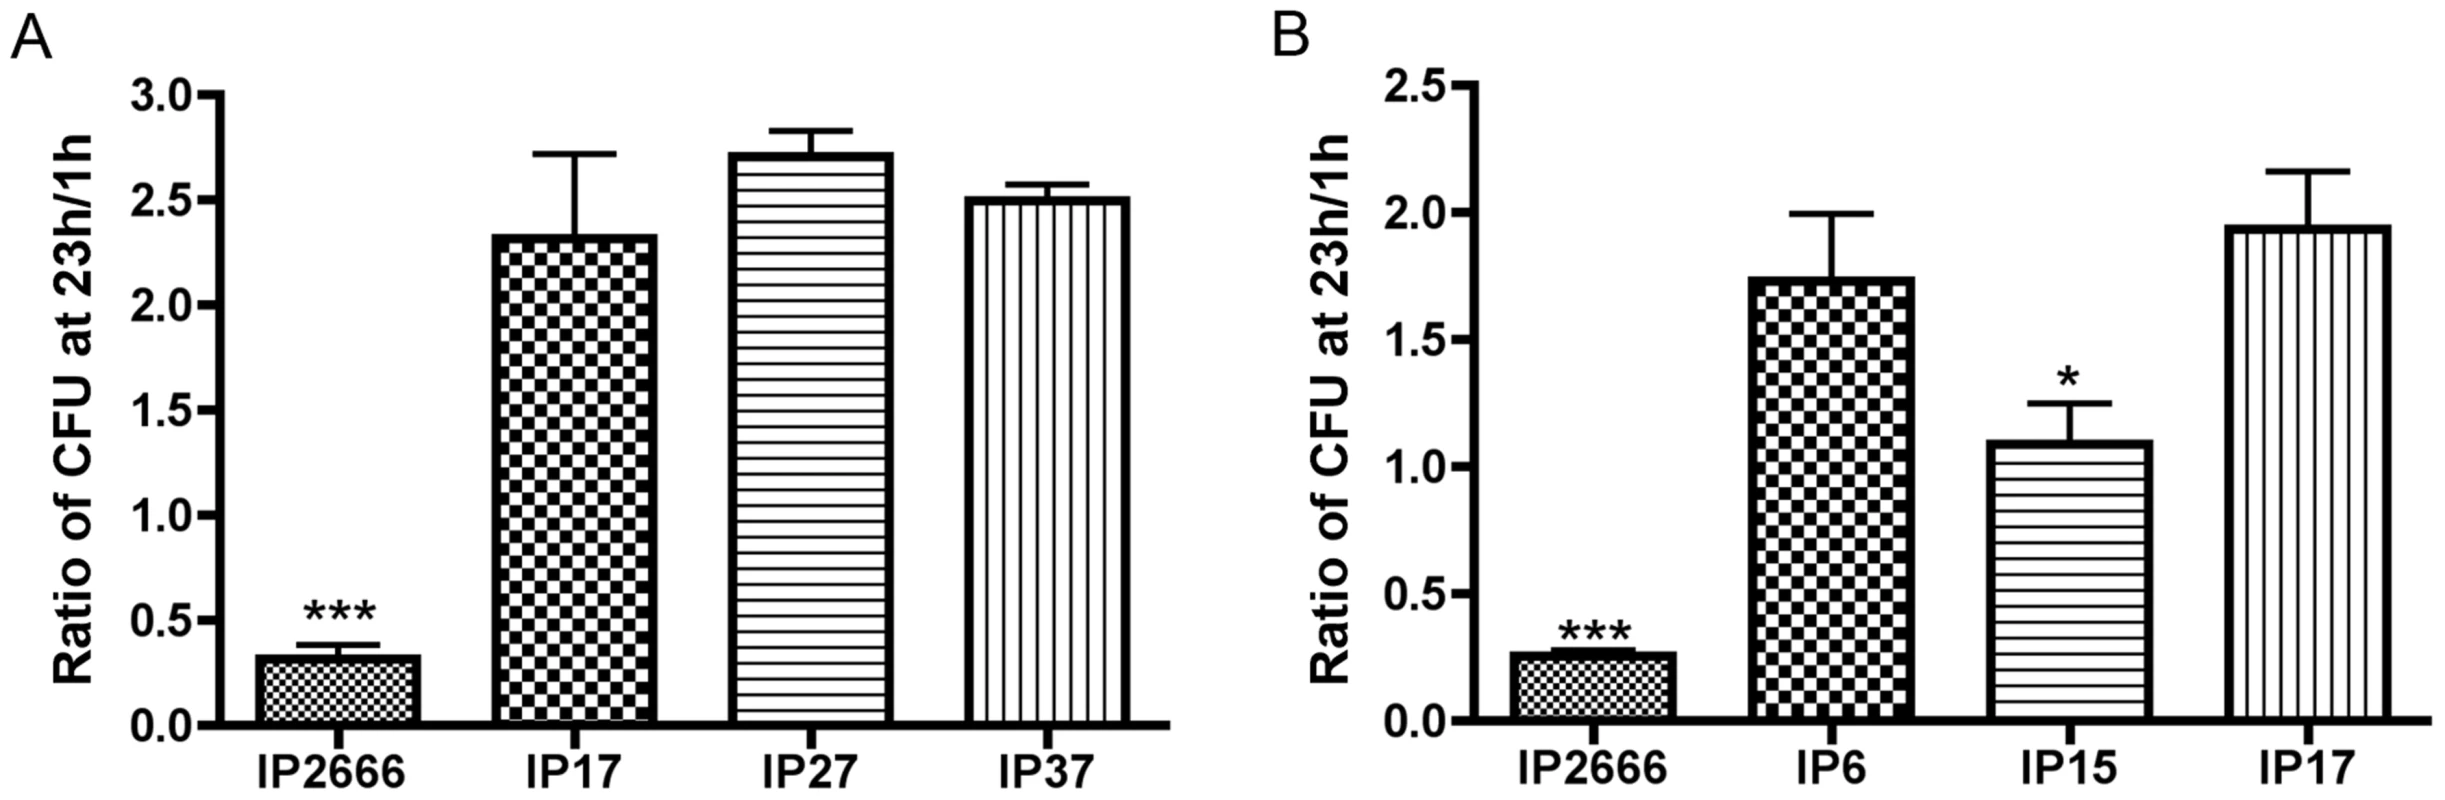 Comparison of different <i>Y. pseudotuberculosis</i> strains for survival inside macrophages as determined by CFU assay.